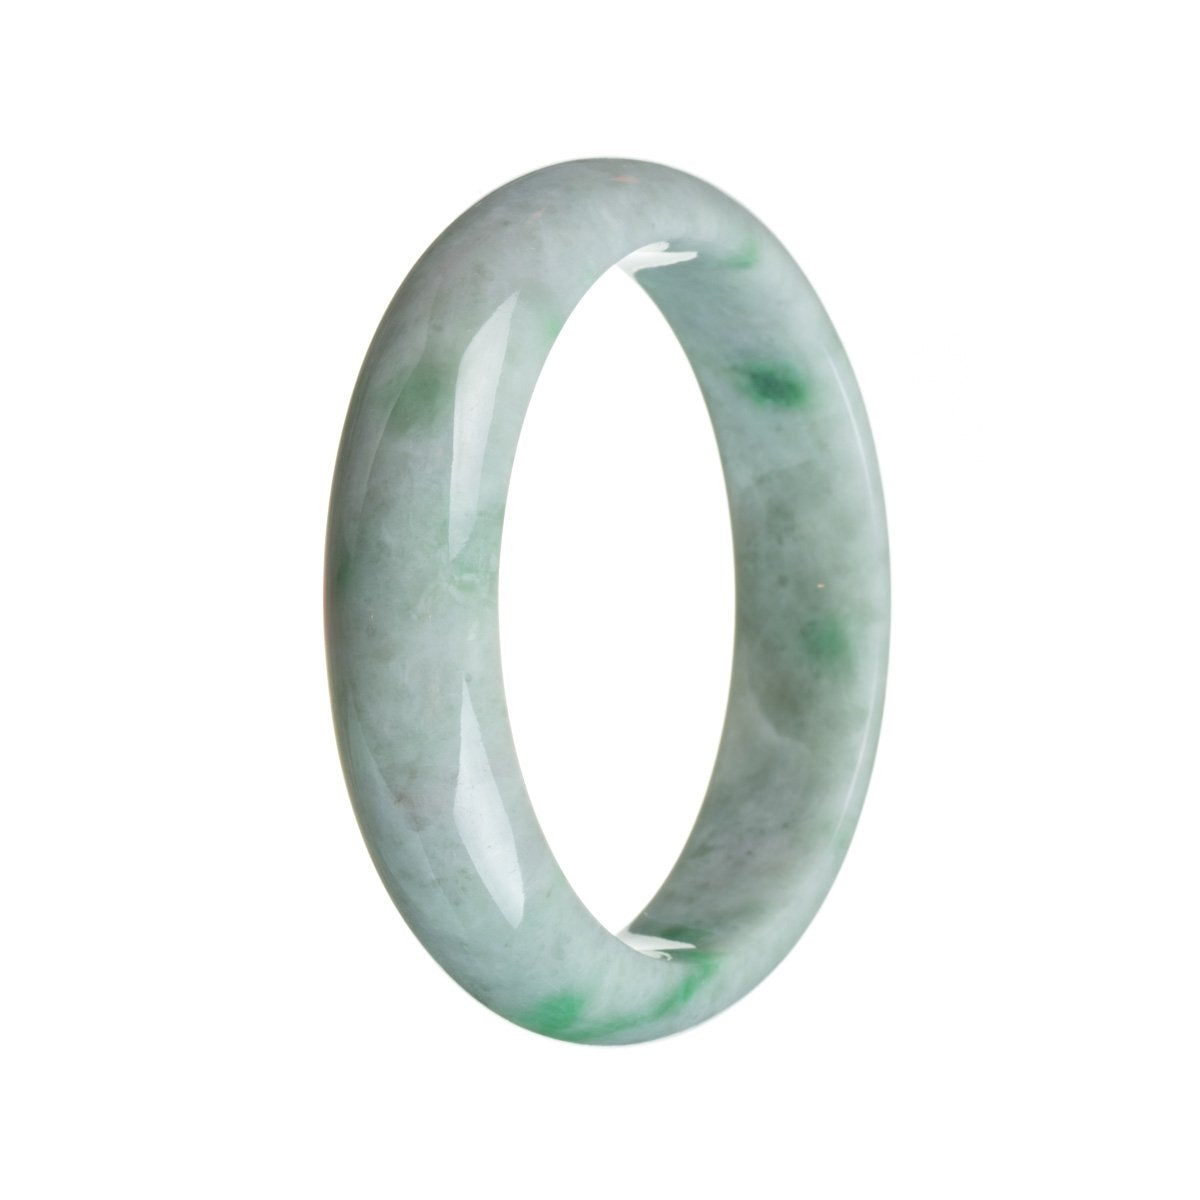 A close-up image of a traditional jade bracelet with a half-moon design. The bracelet is made of real natural green jade and is set against a white background. The bracelet measures 58mm in size and is crafted by MAYS GEMS.